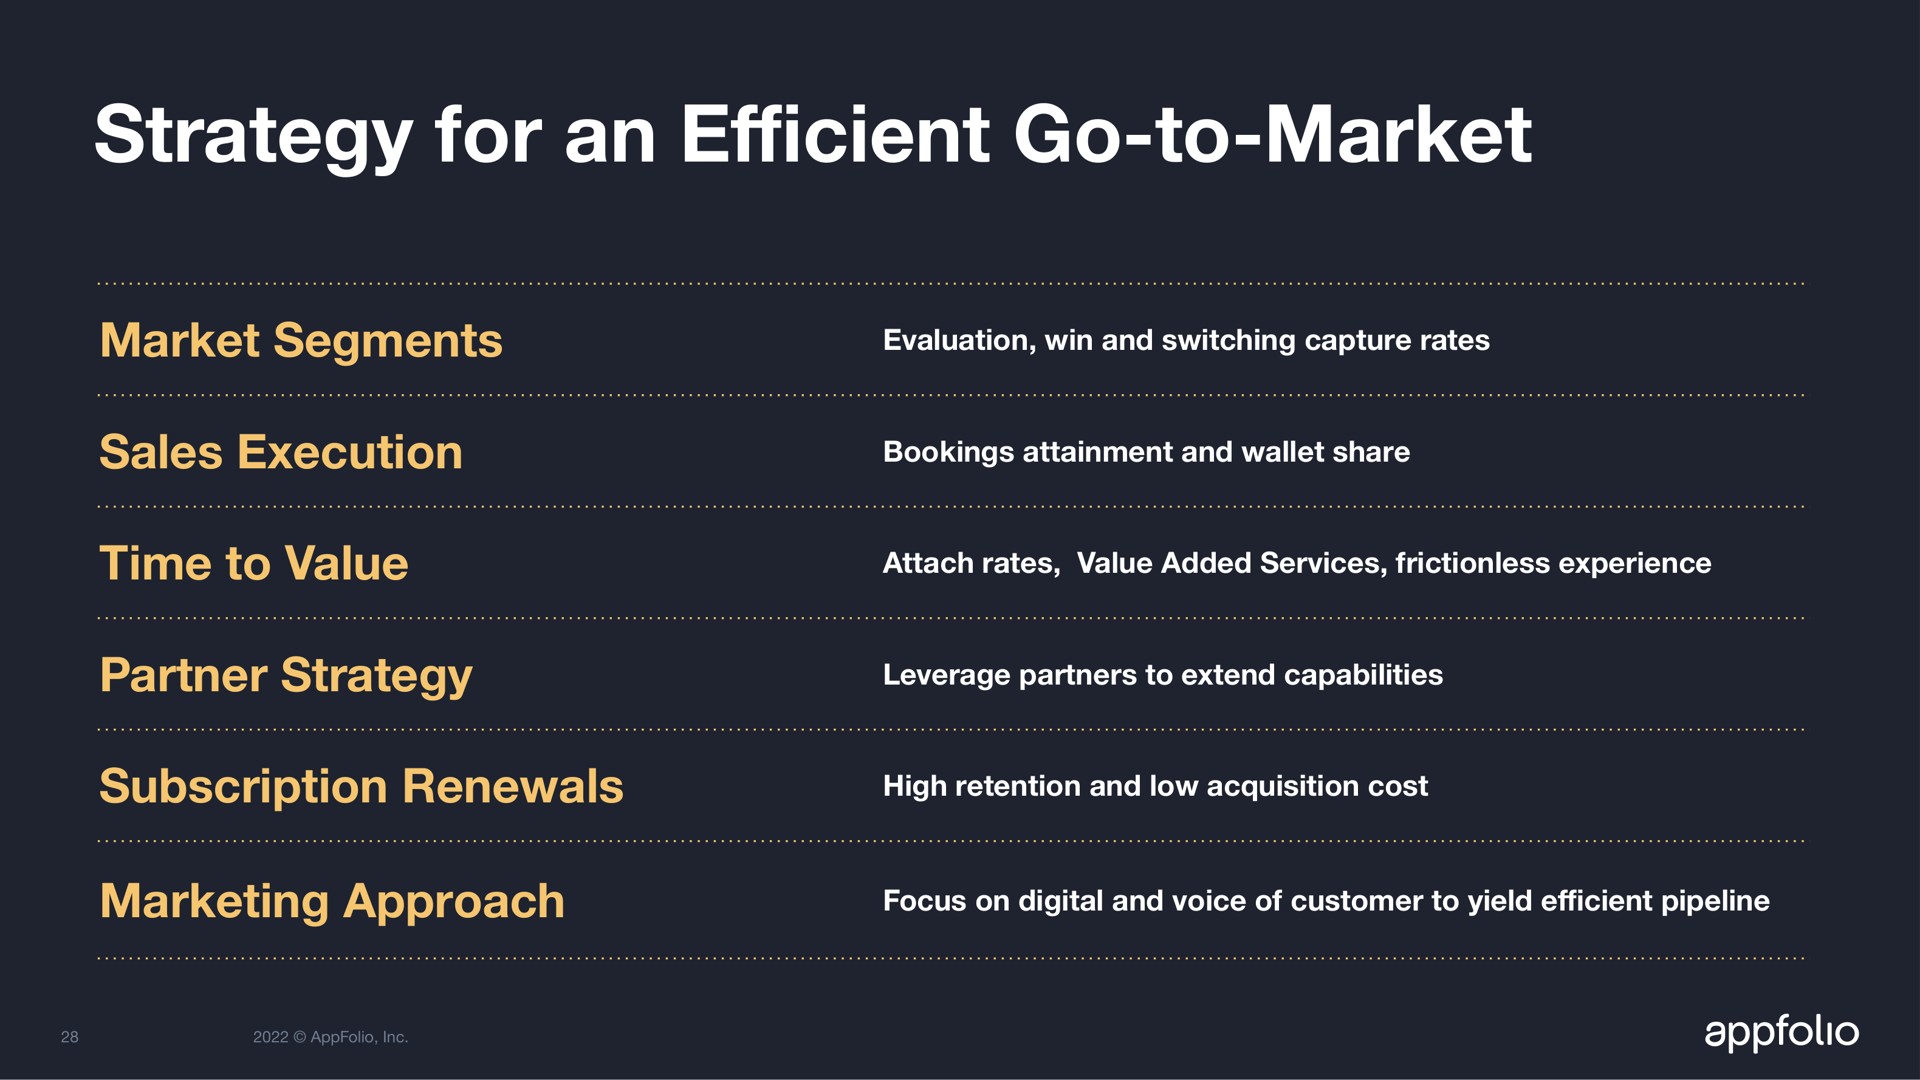 strategy for an go to market market segments sales execution time to value partner strategy subscription renewals marketing approach efficient | AppFolio